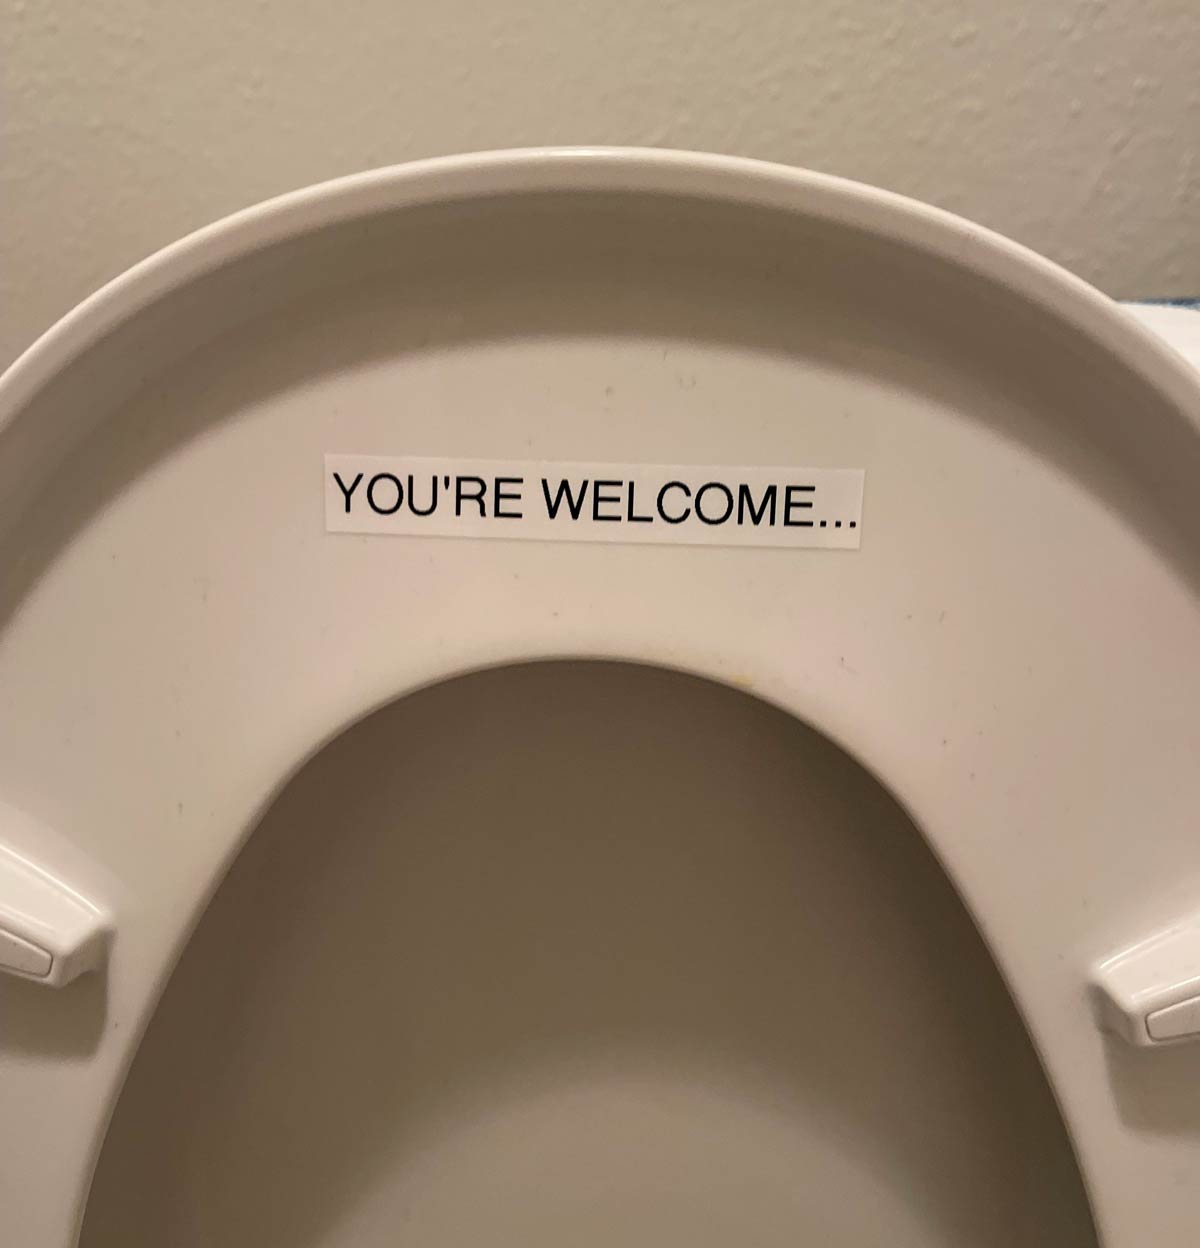 My girlfriend complained of the toilet seat being up, and I told her she’s the minority in this household. This was her reply..